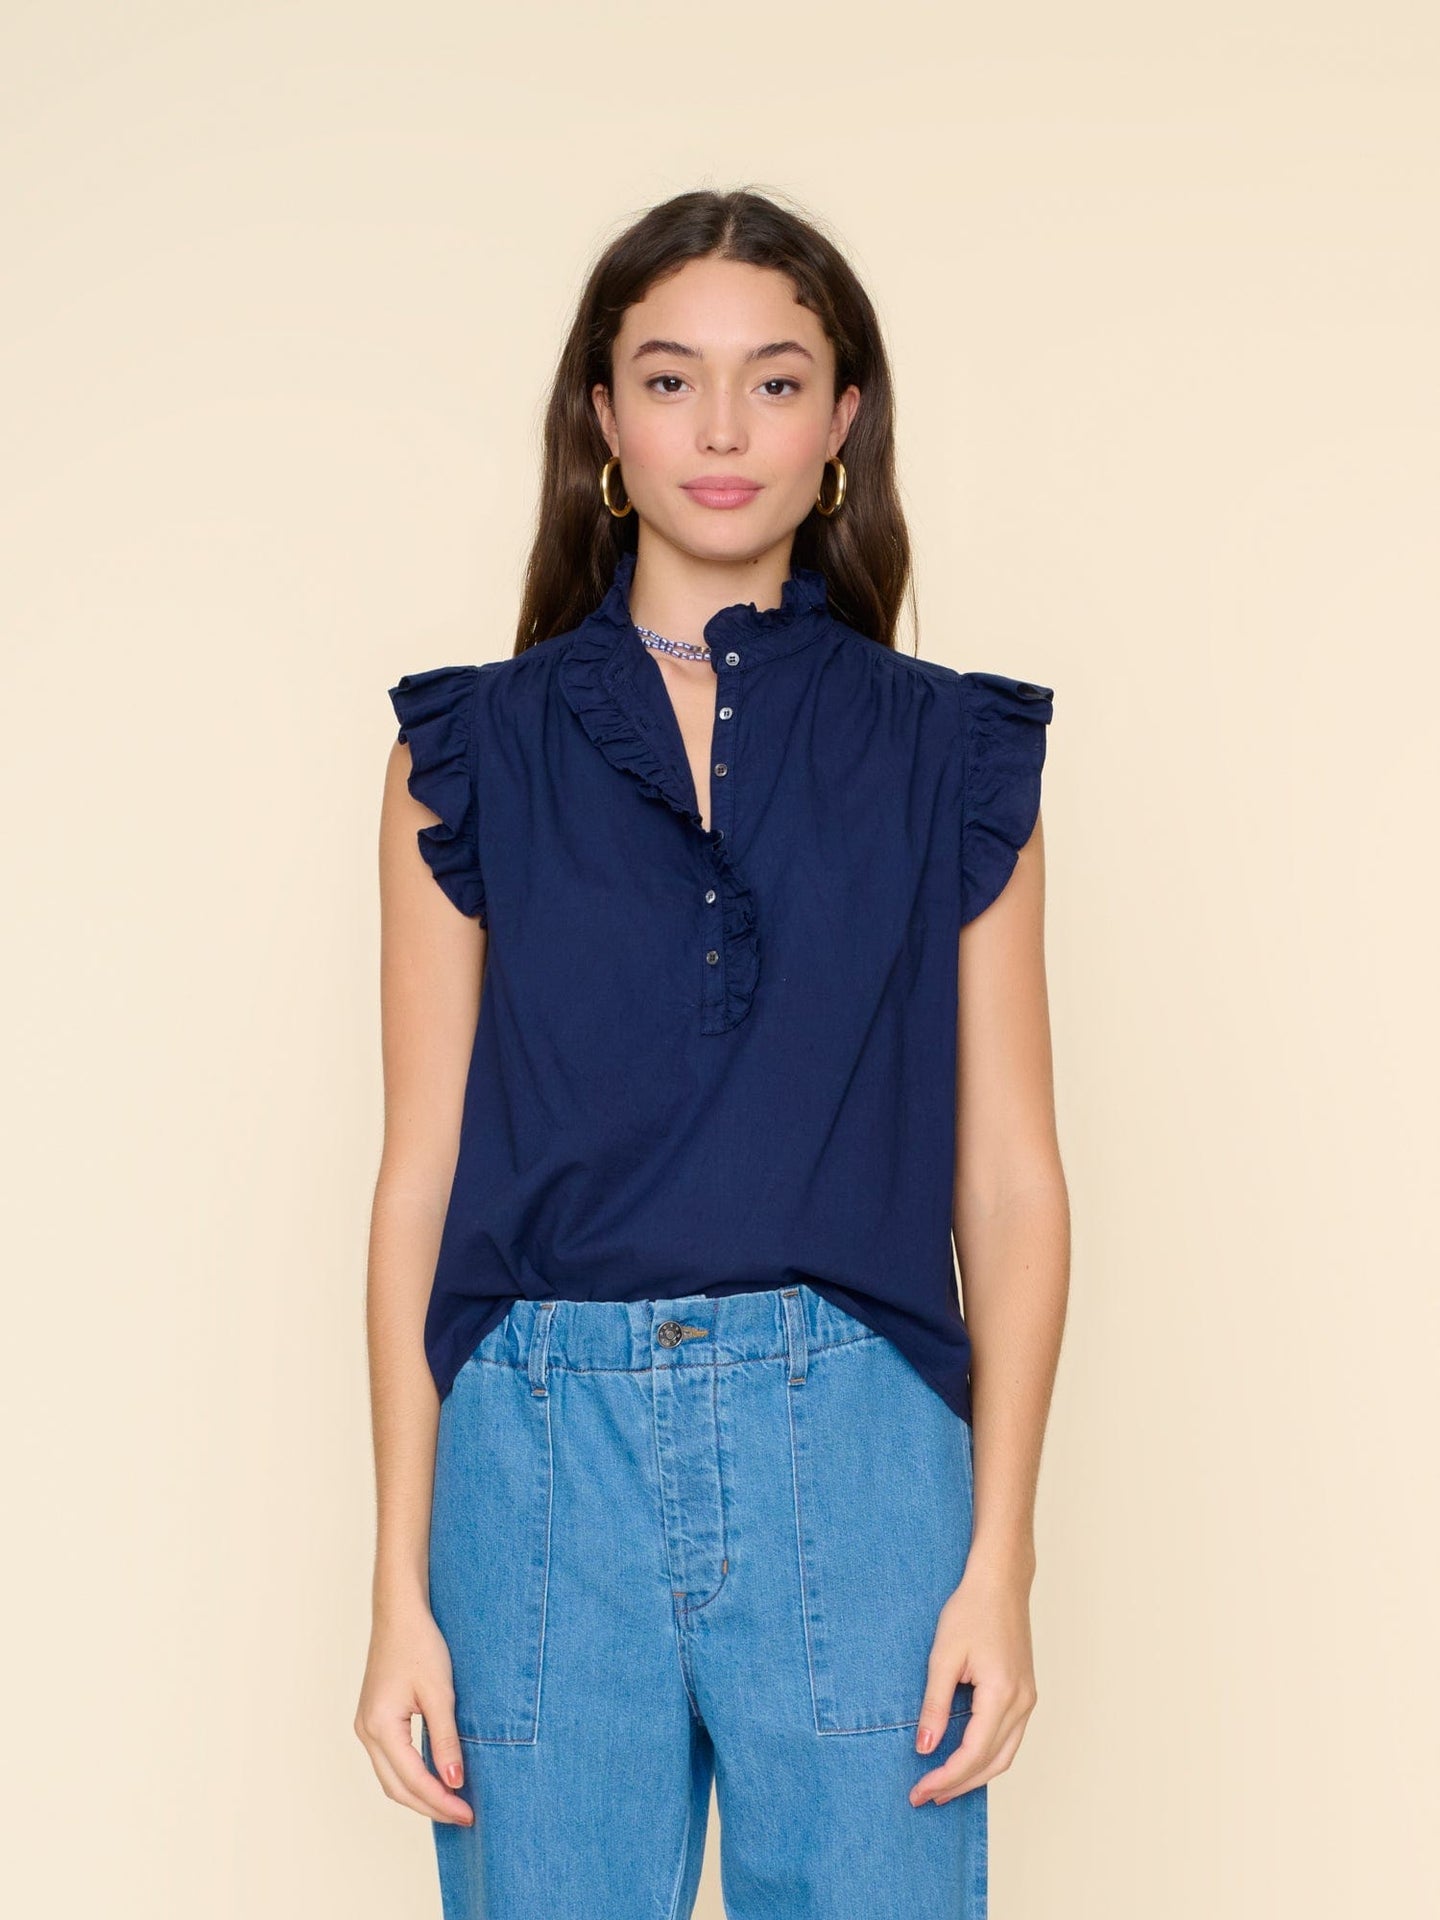 Blouse X5ctp121 Brenna Top Navy